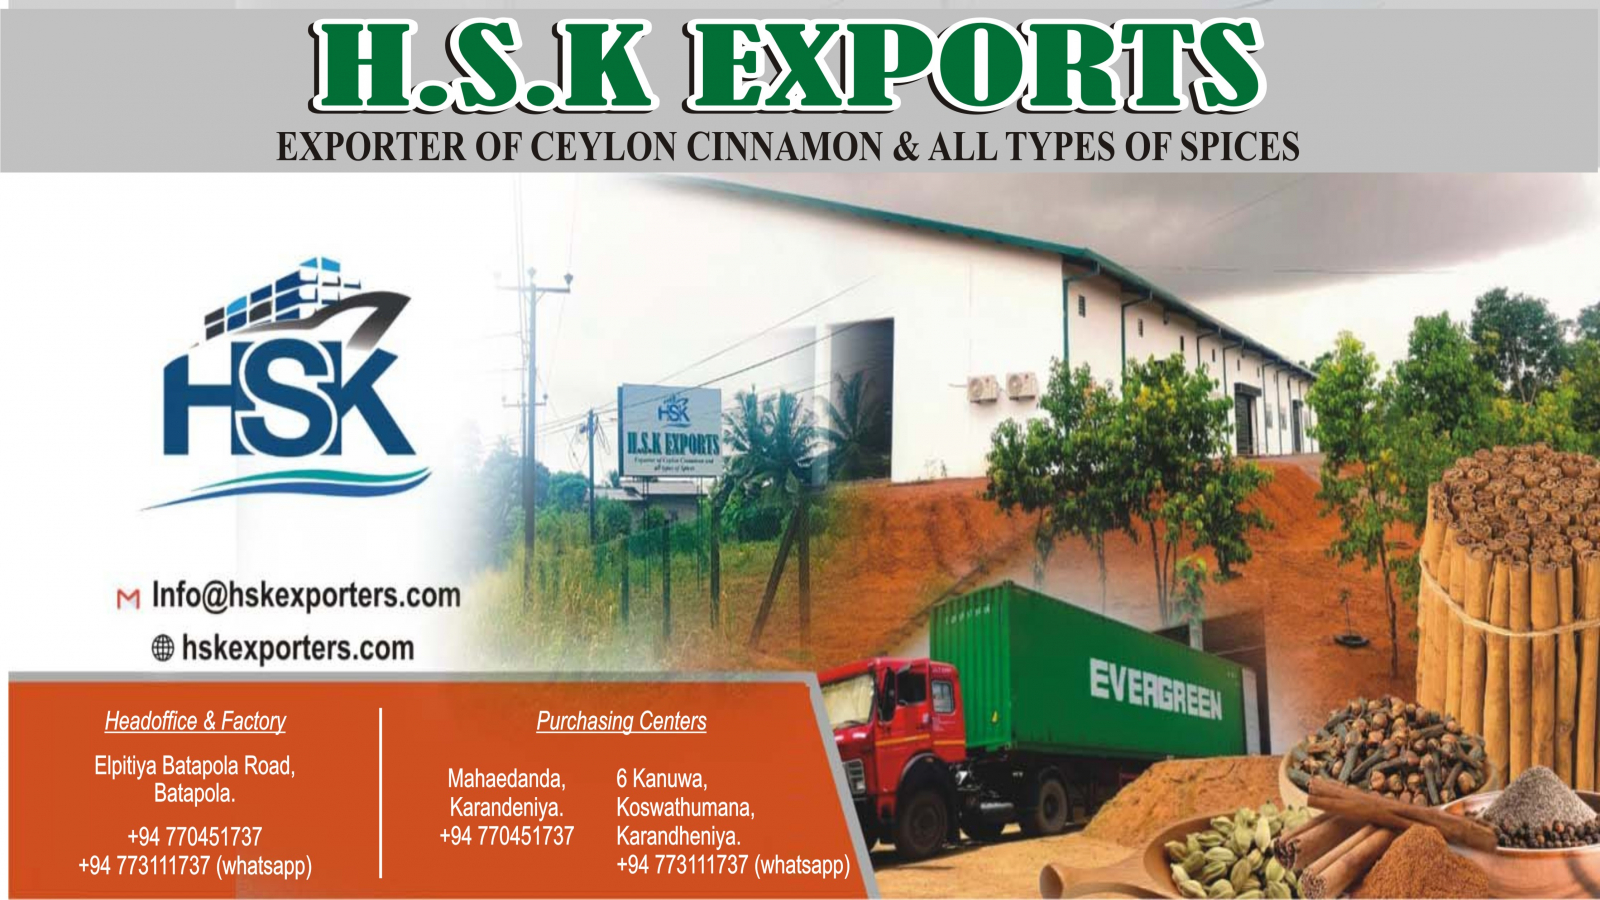 H S K EXPORTS